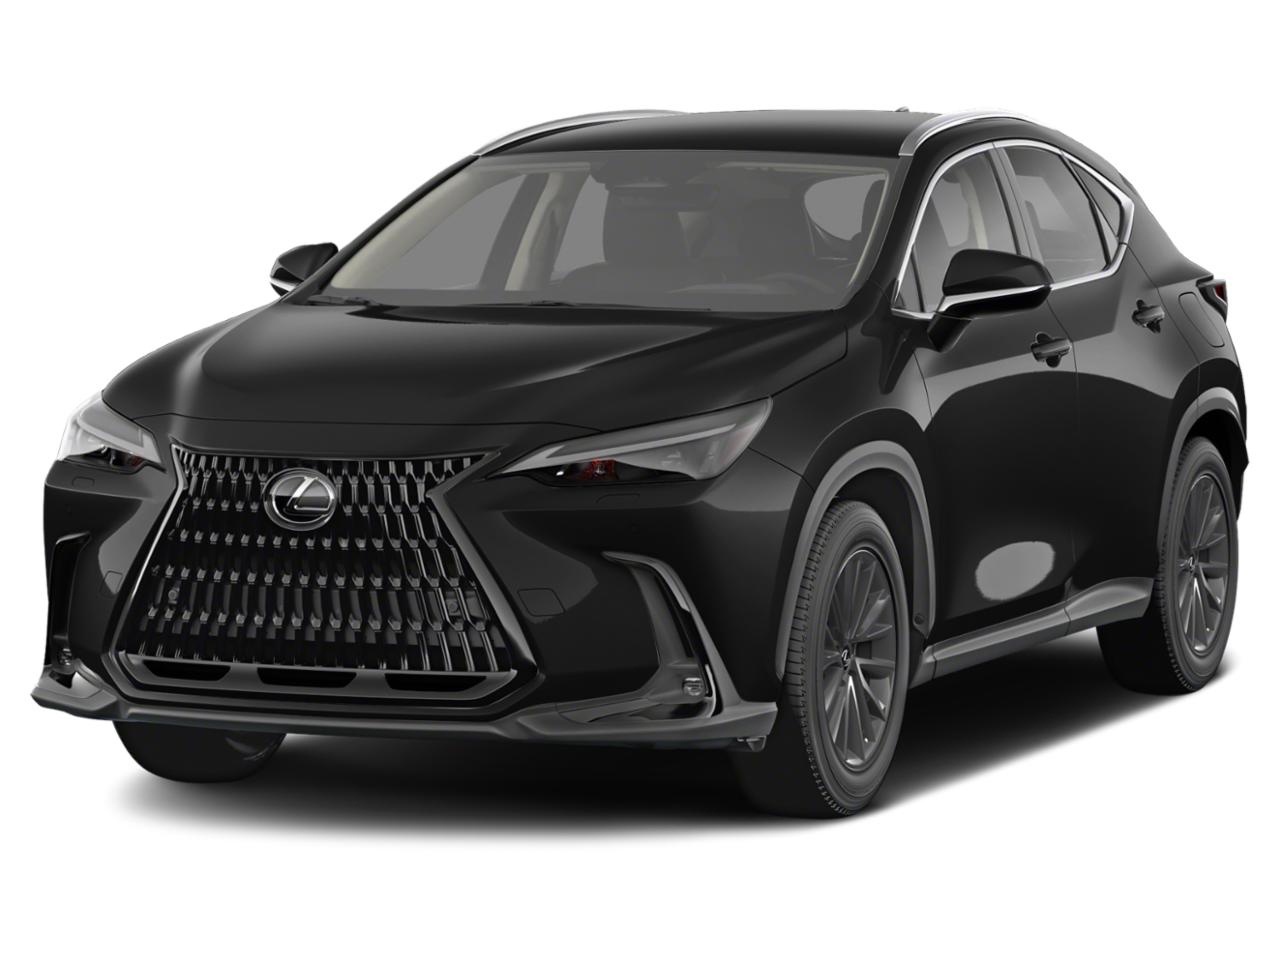 Search New Lexus RX Vehicles for Sale in Wisconsin - Bergstrom